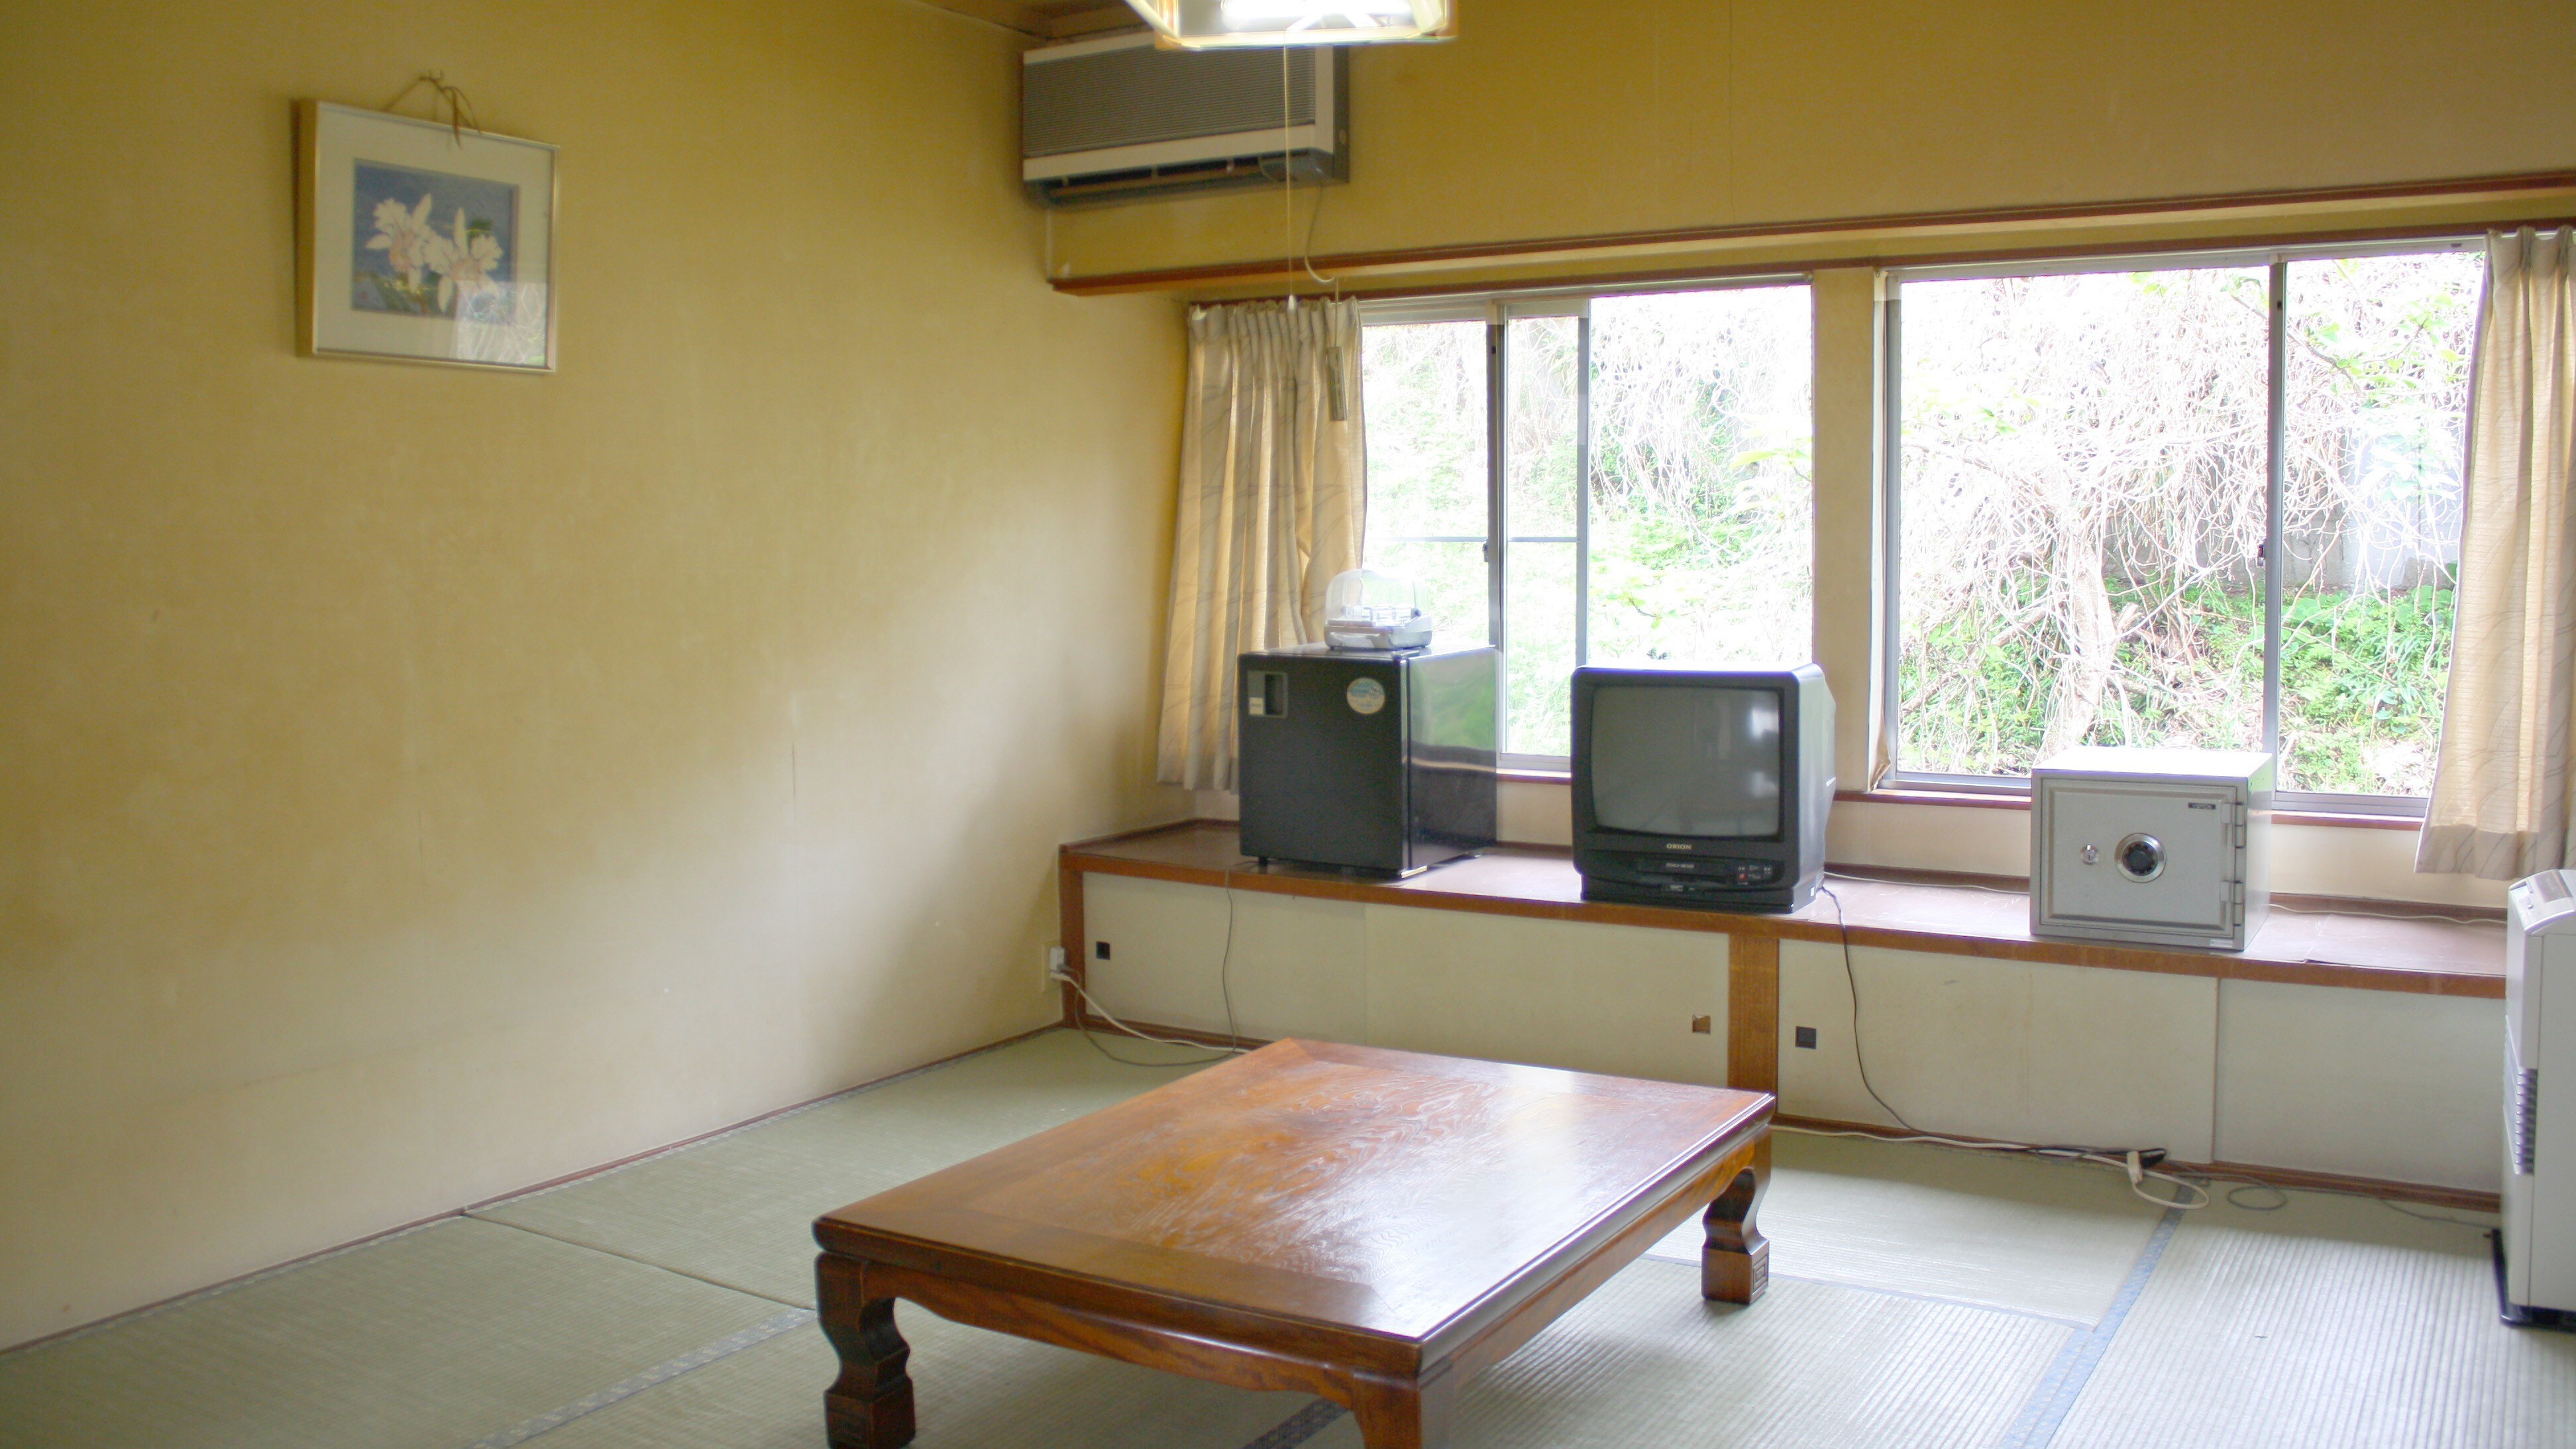 [Old building] There is a reason for the Japanese-style room